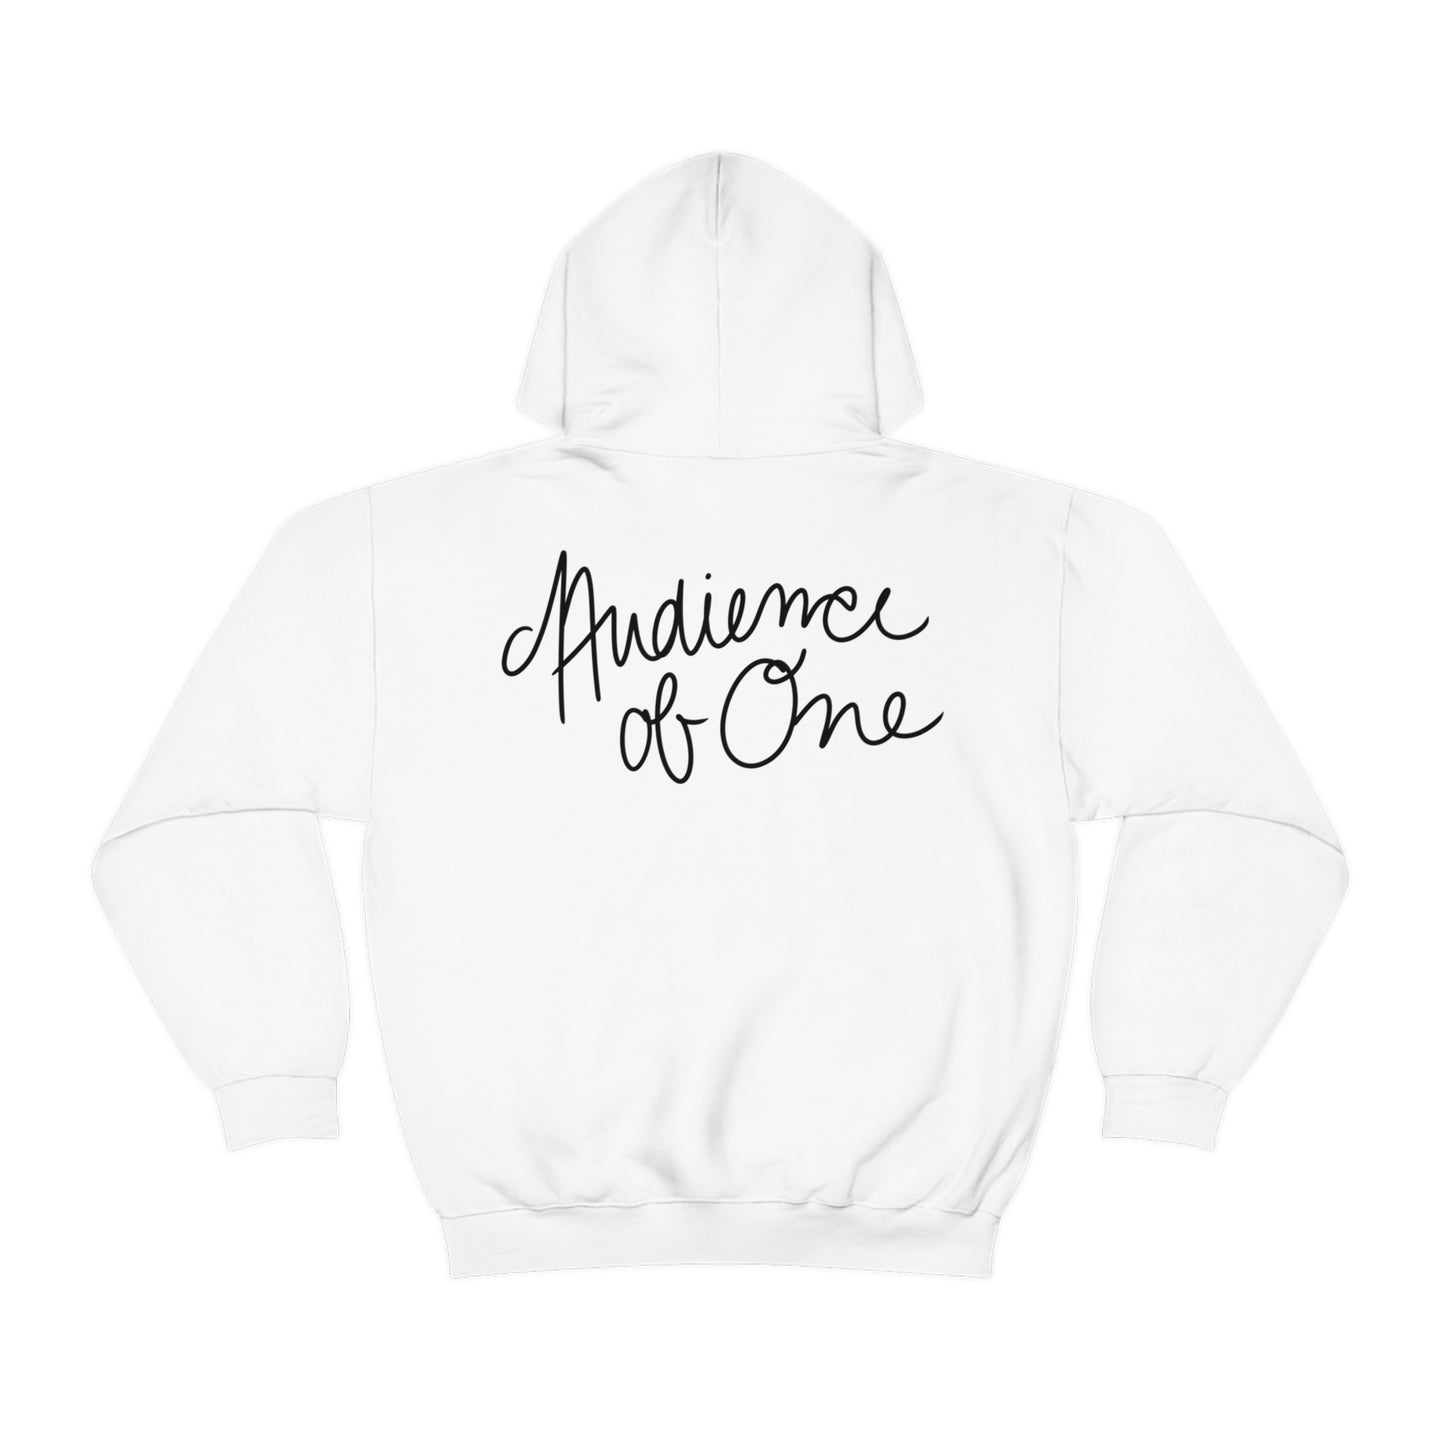 Paige Bachman: Audience of One Hoodie